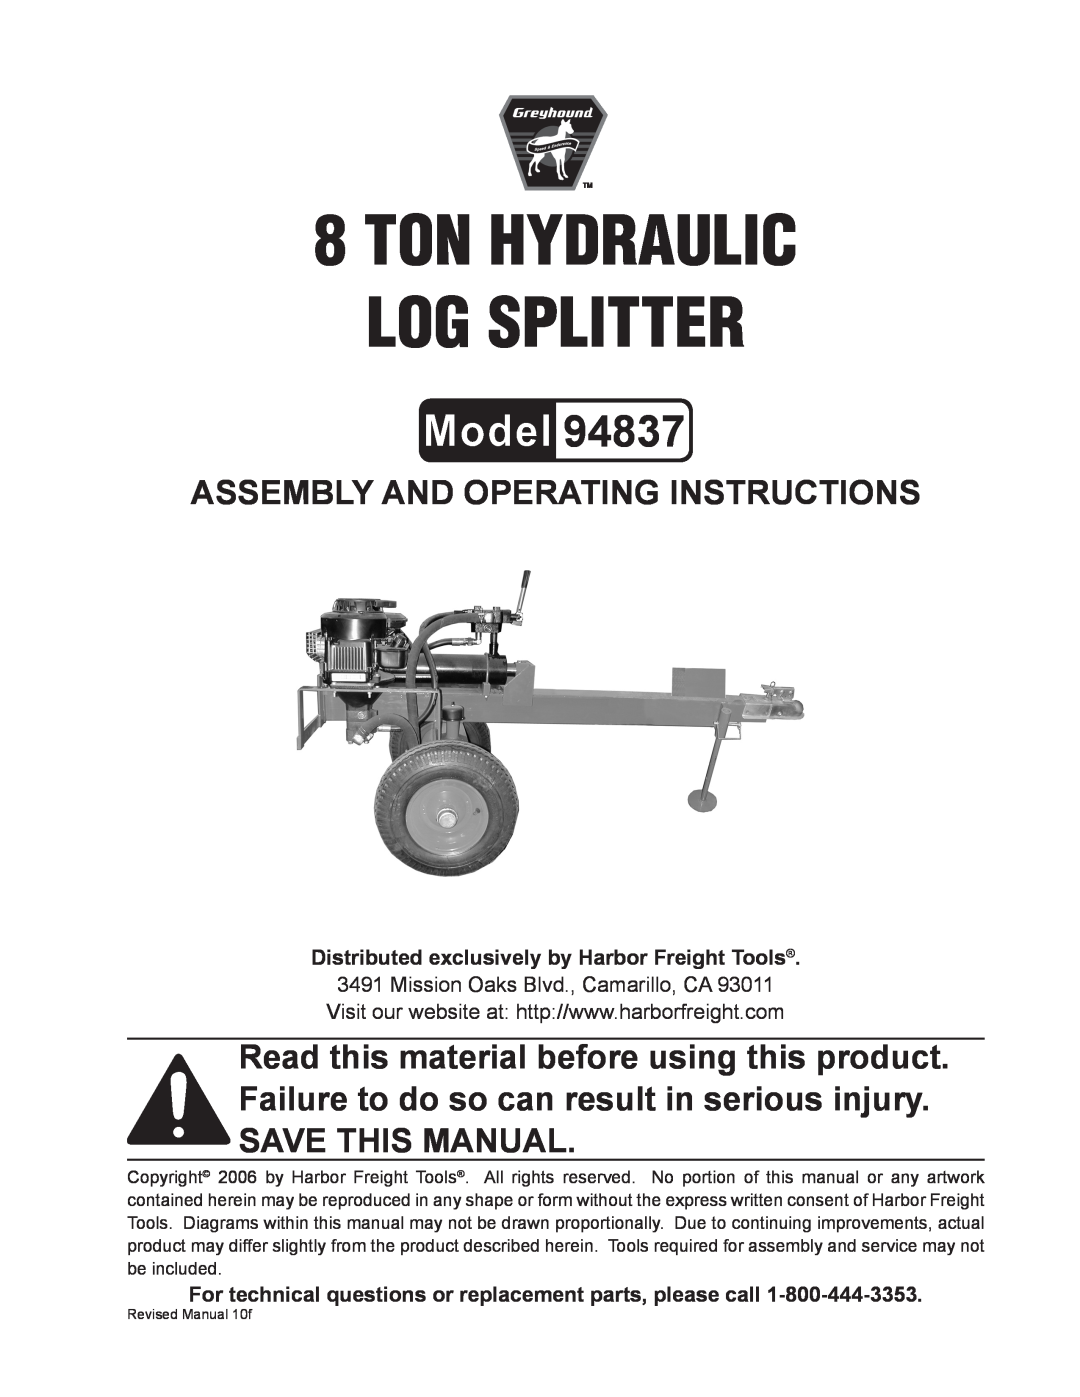 Harbor Freight Tools 94837 manual Ton Hydraulic Log Splitter, Assembly And Operating Instructions 